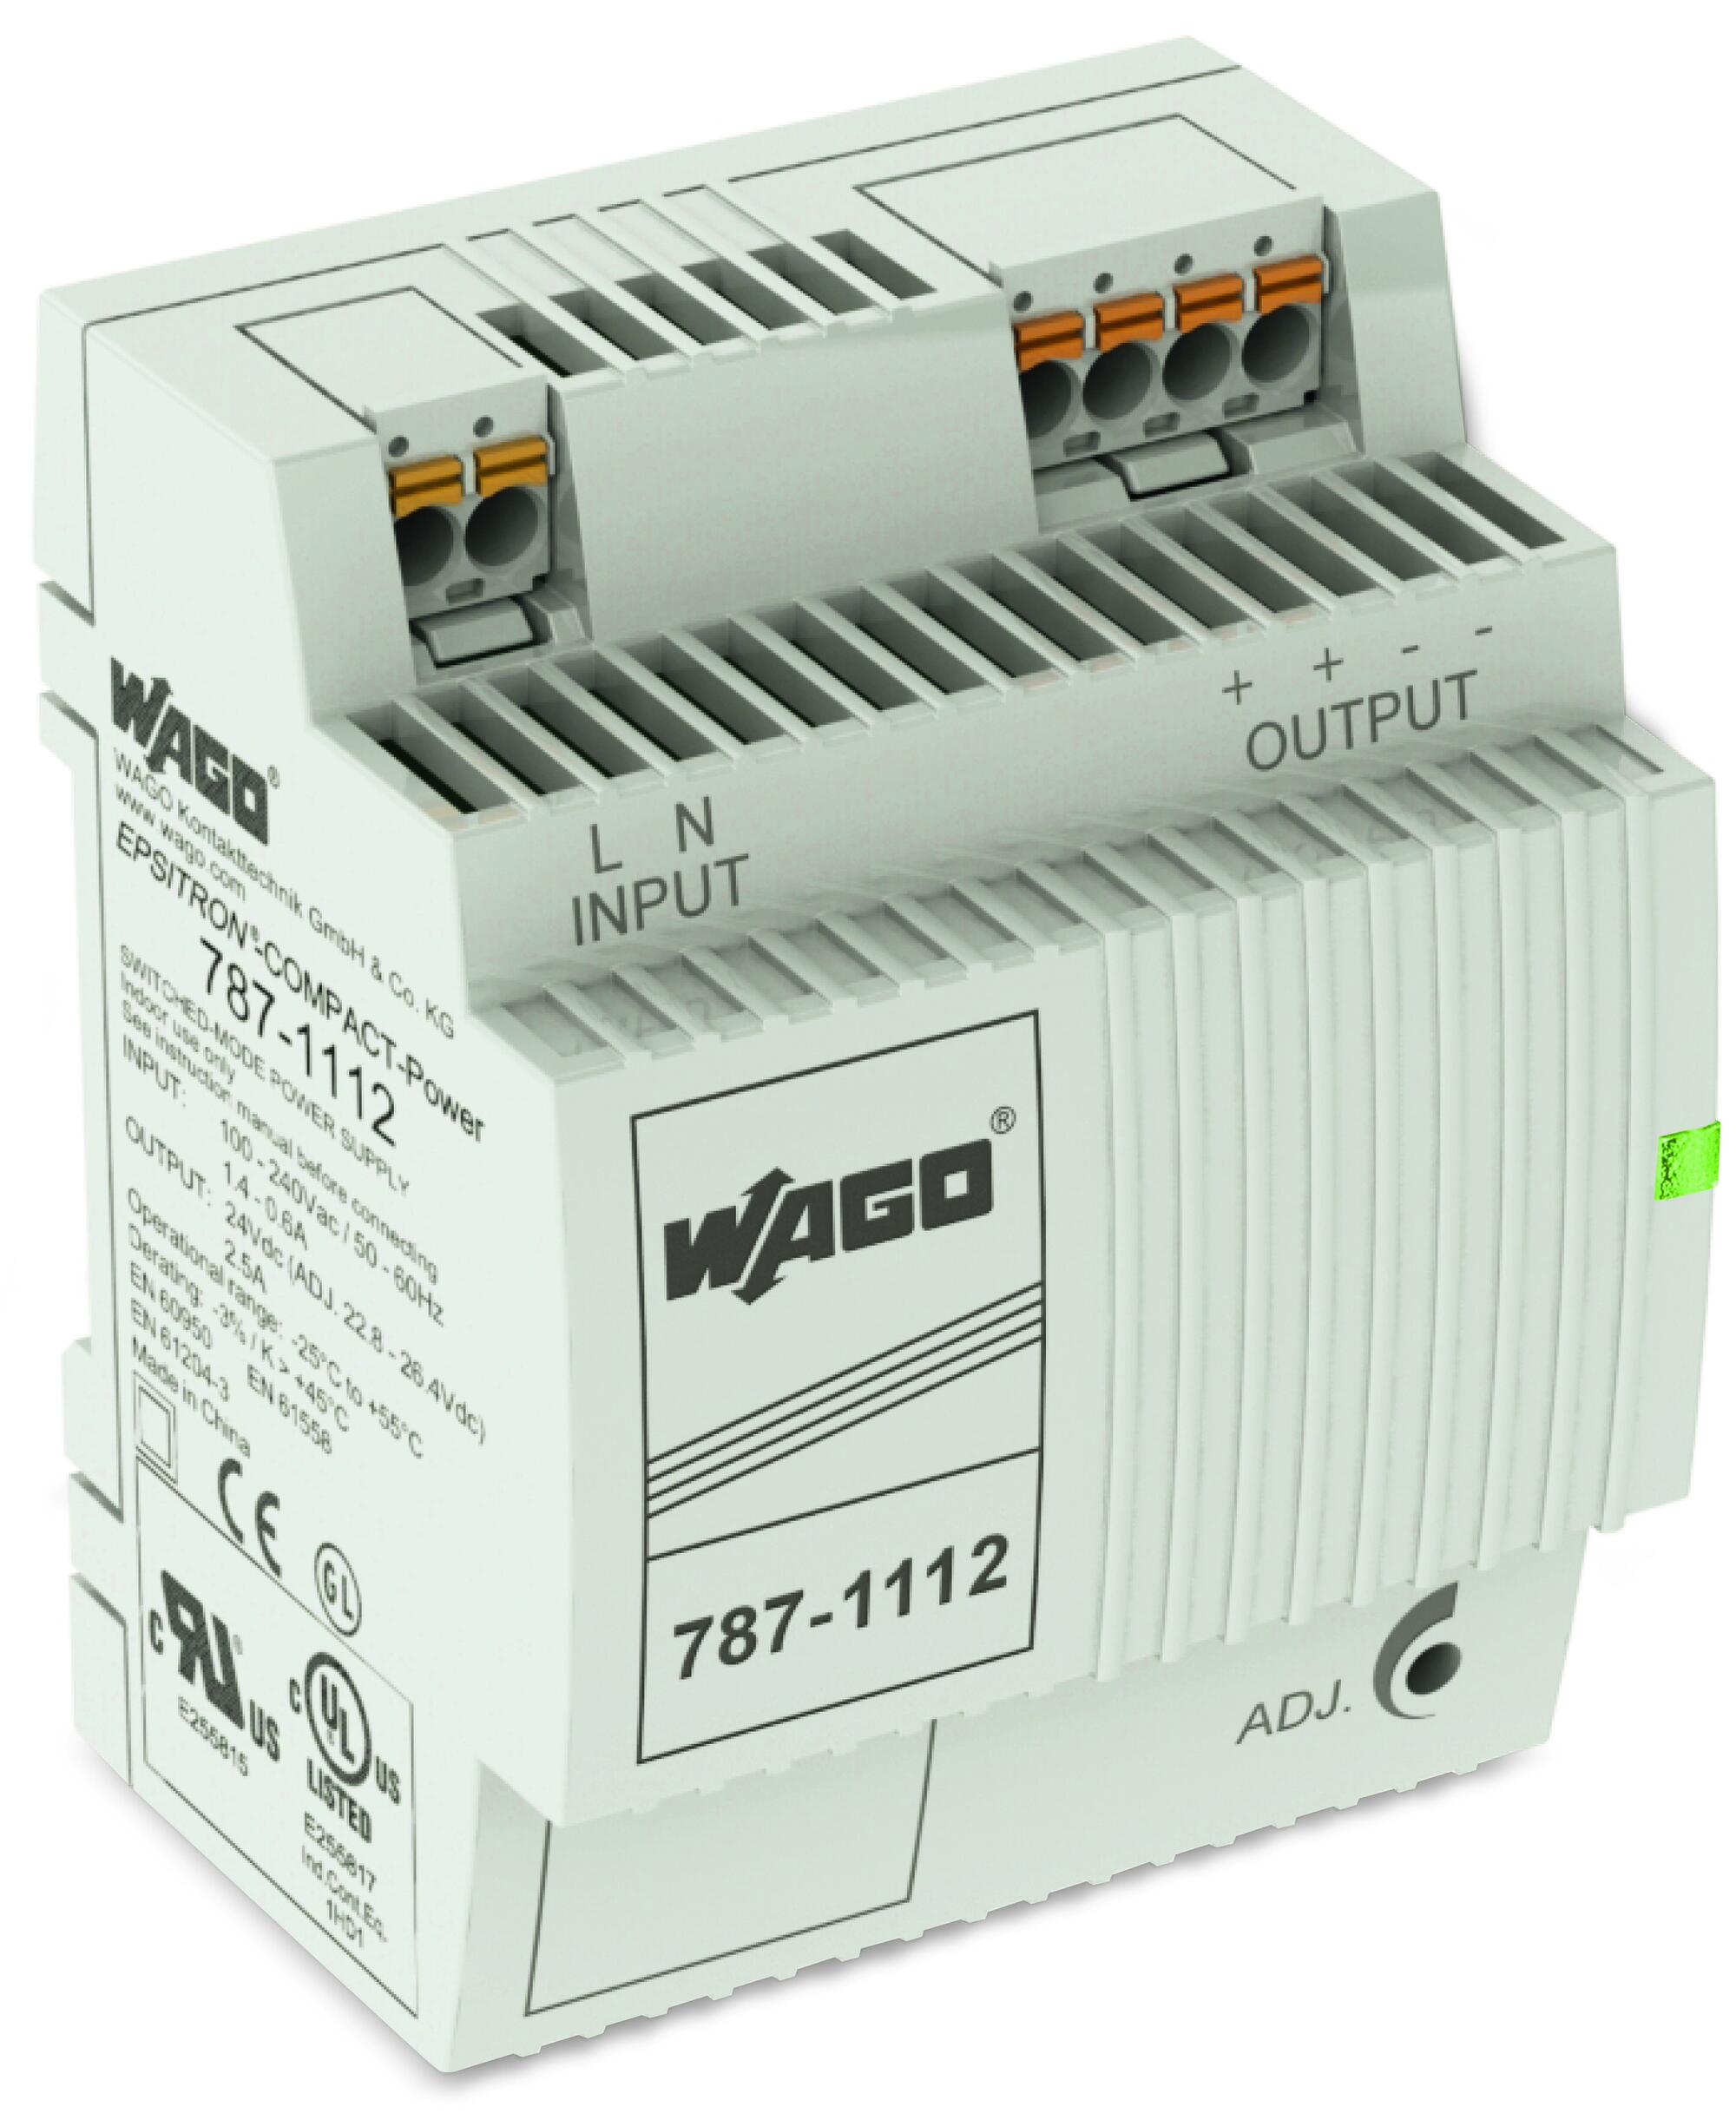 Switched-mode power supply; Compact; 1-phase; 24 VDC output voltage; 2.5 A output current; DC-OK LED